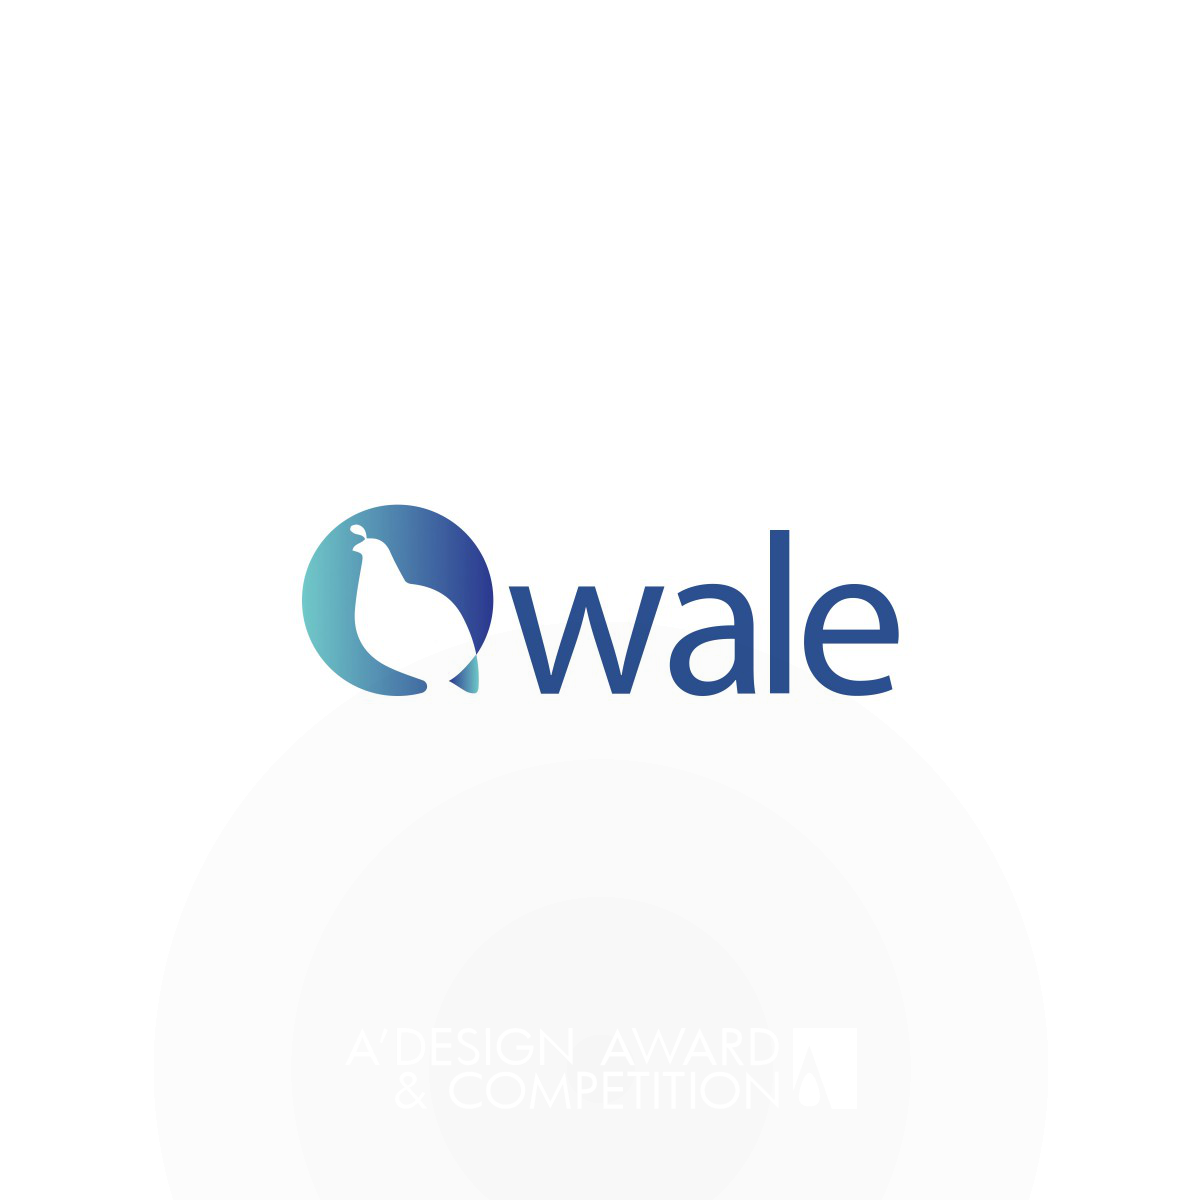 New Visual Direction of Qwale Brand Identity by Ruiqi Sun